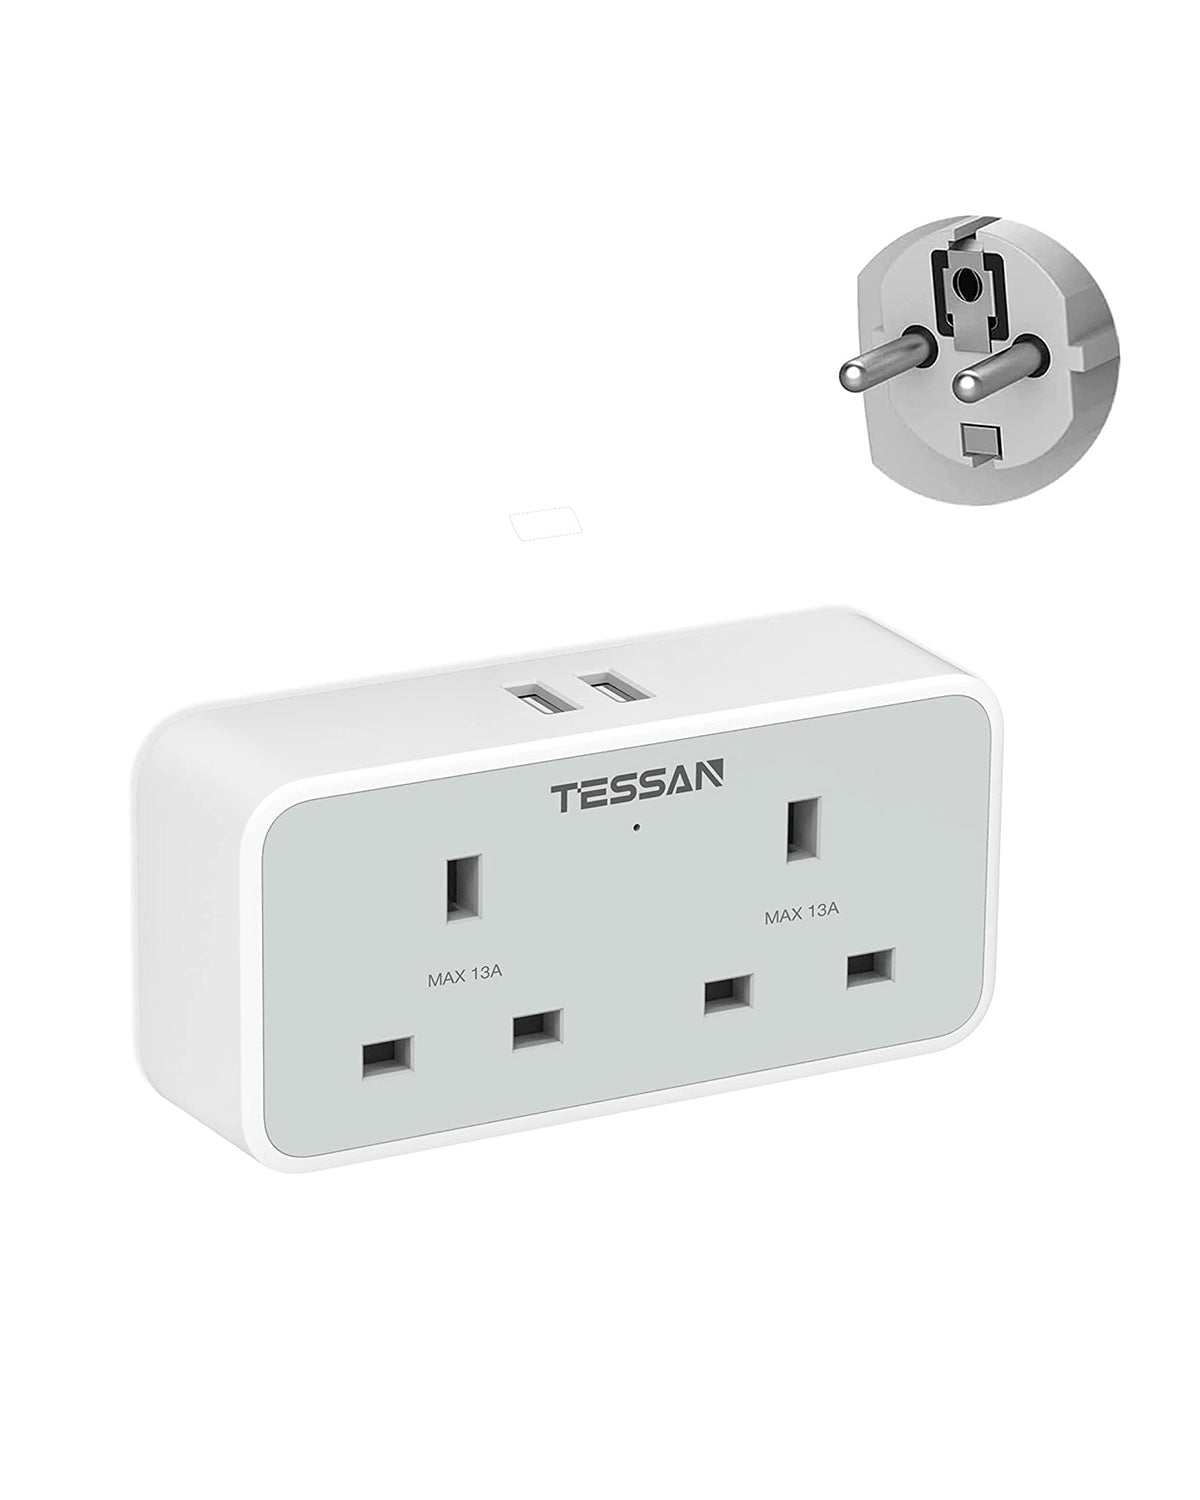 UK To European with 2 USB Ports